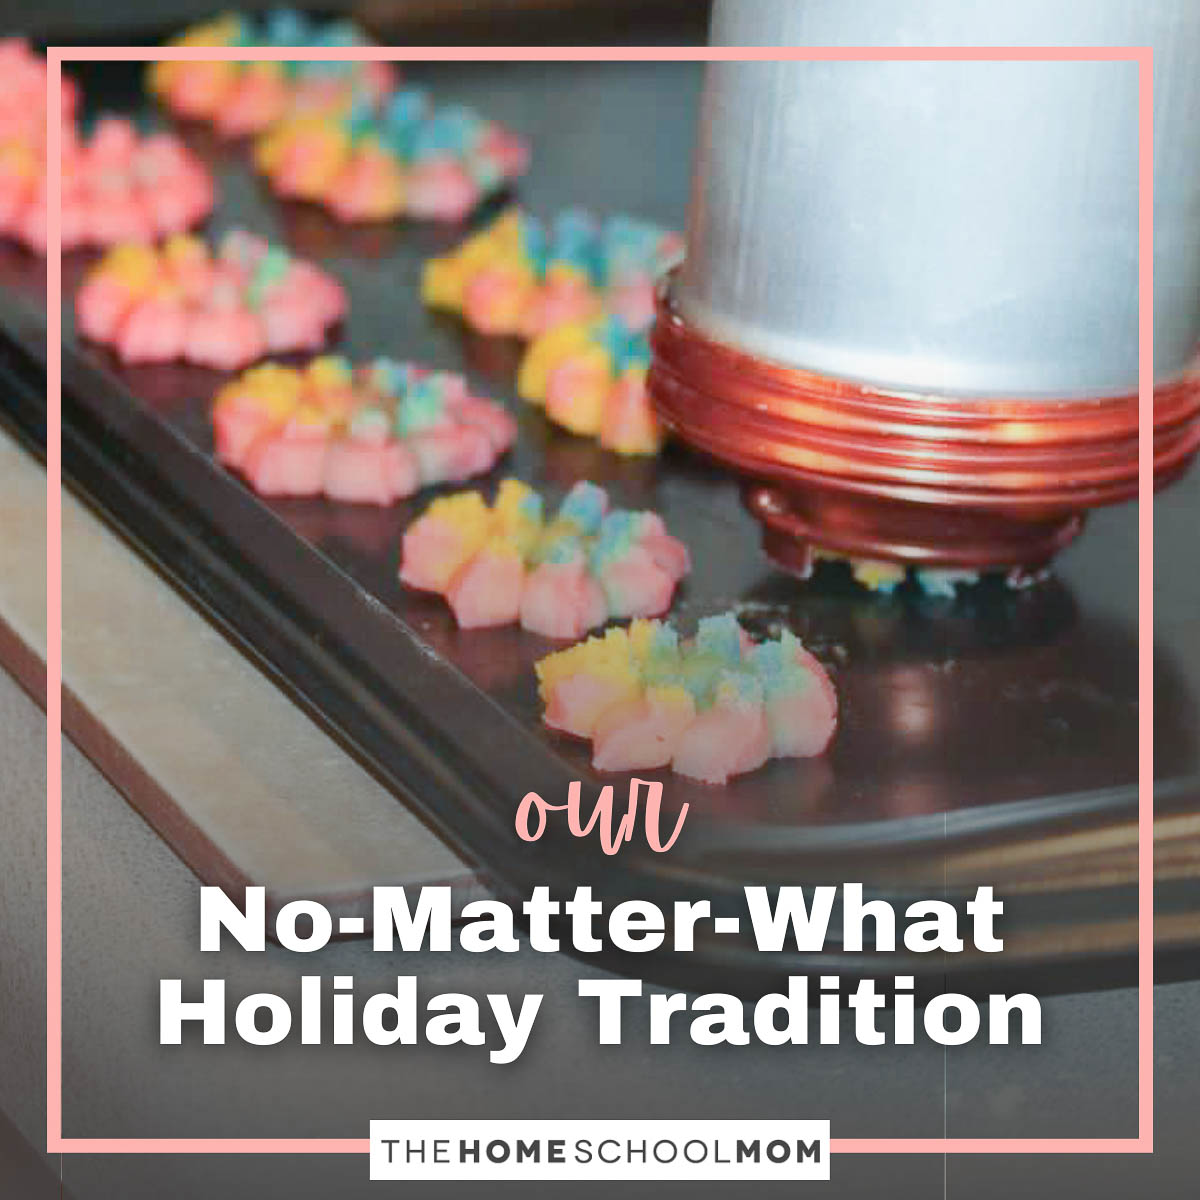 Our No-Matter-What Holiday Tradition